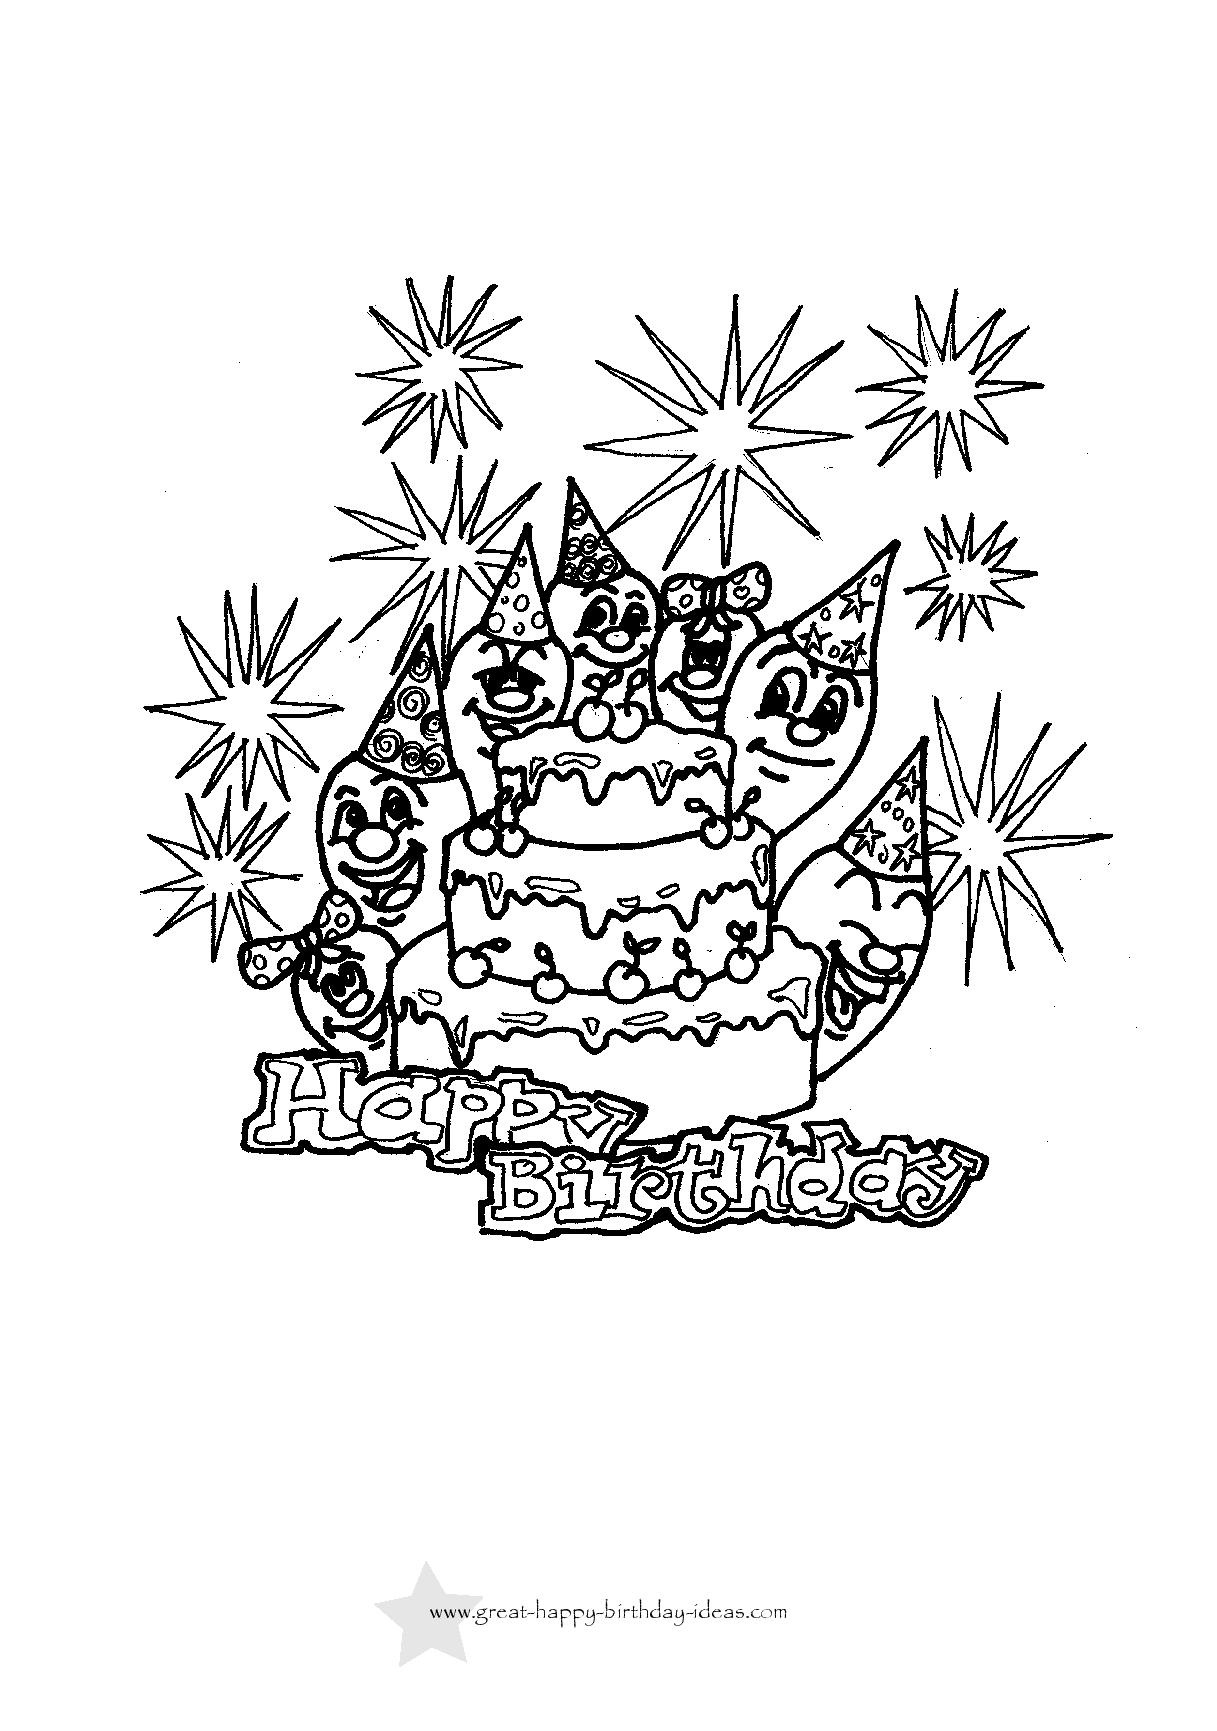 Birthday Coloring Cards Free Printable - Free Printable Birthday Cards To Color